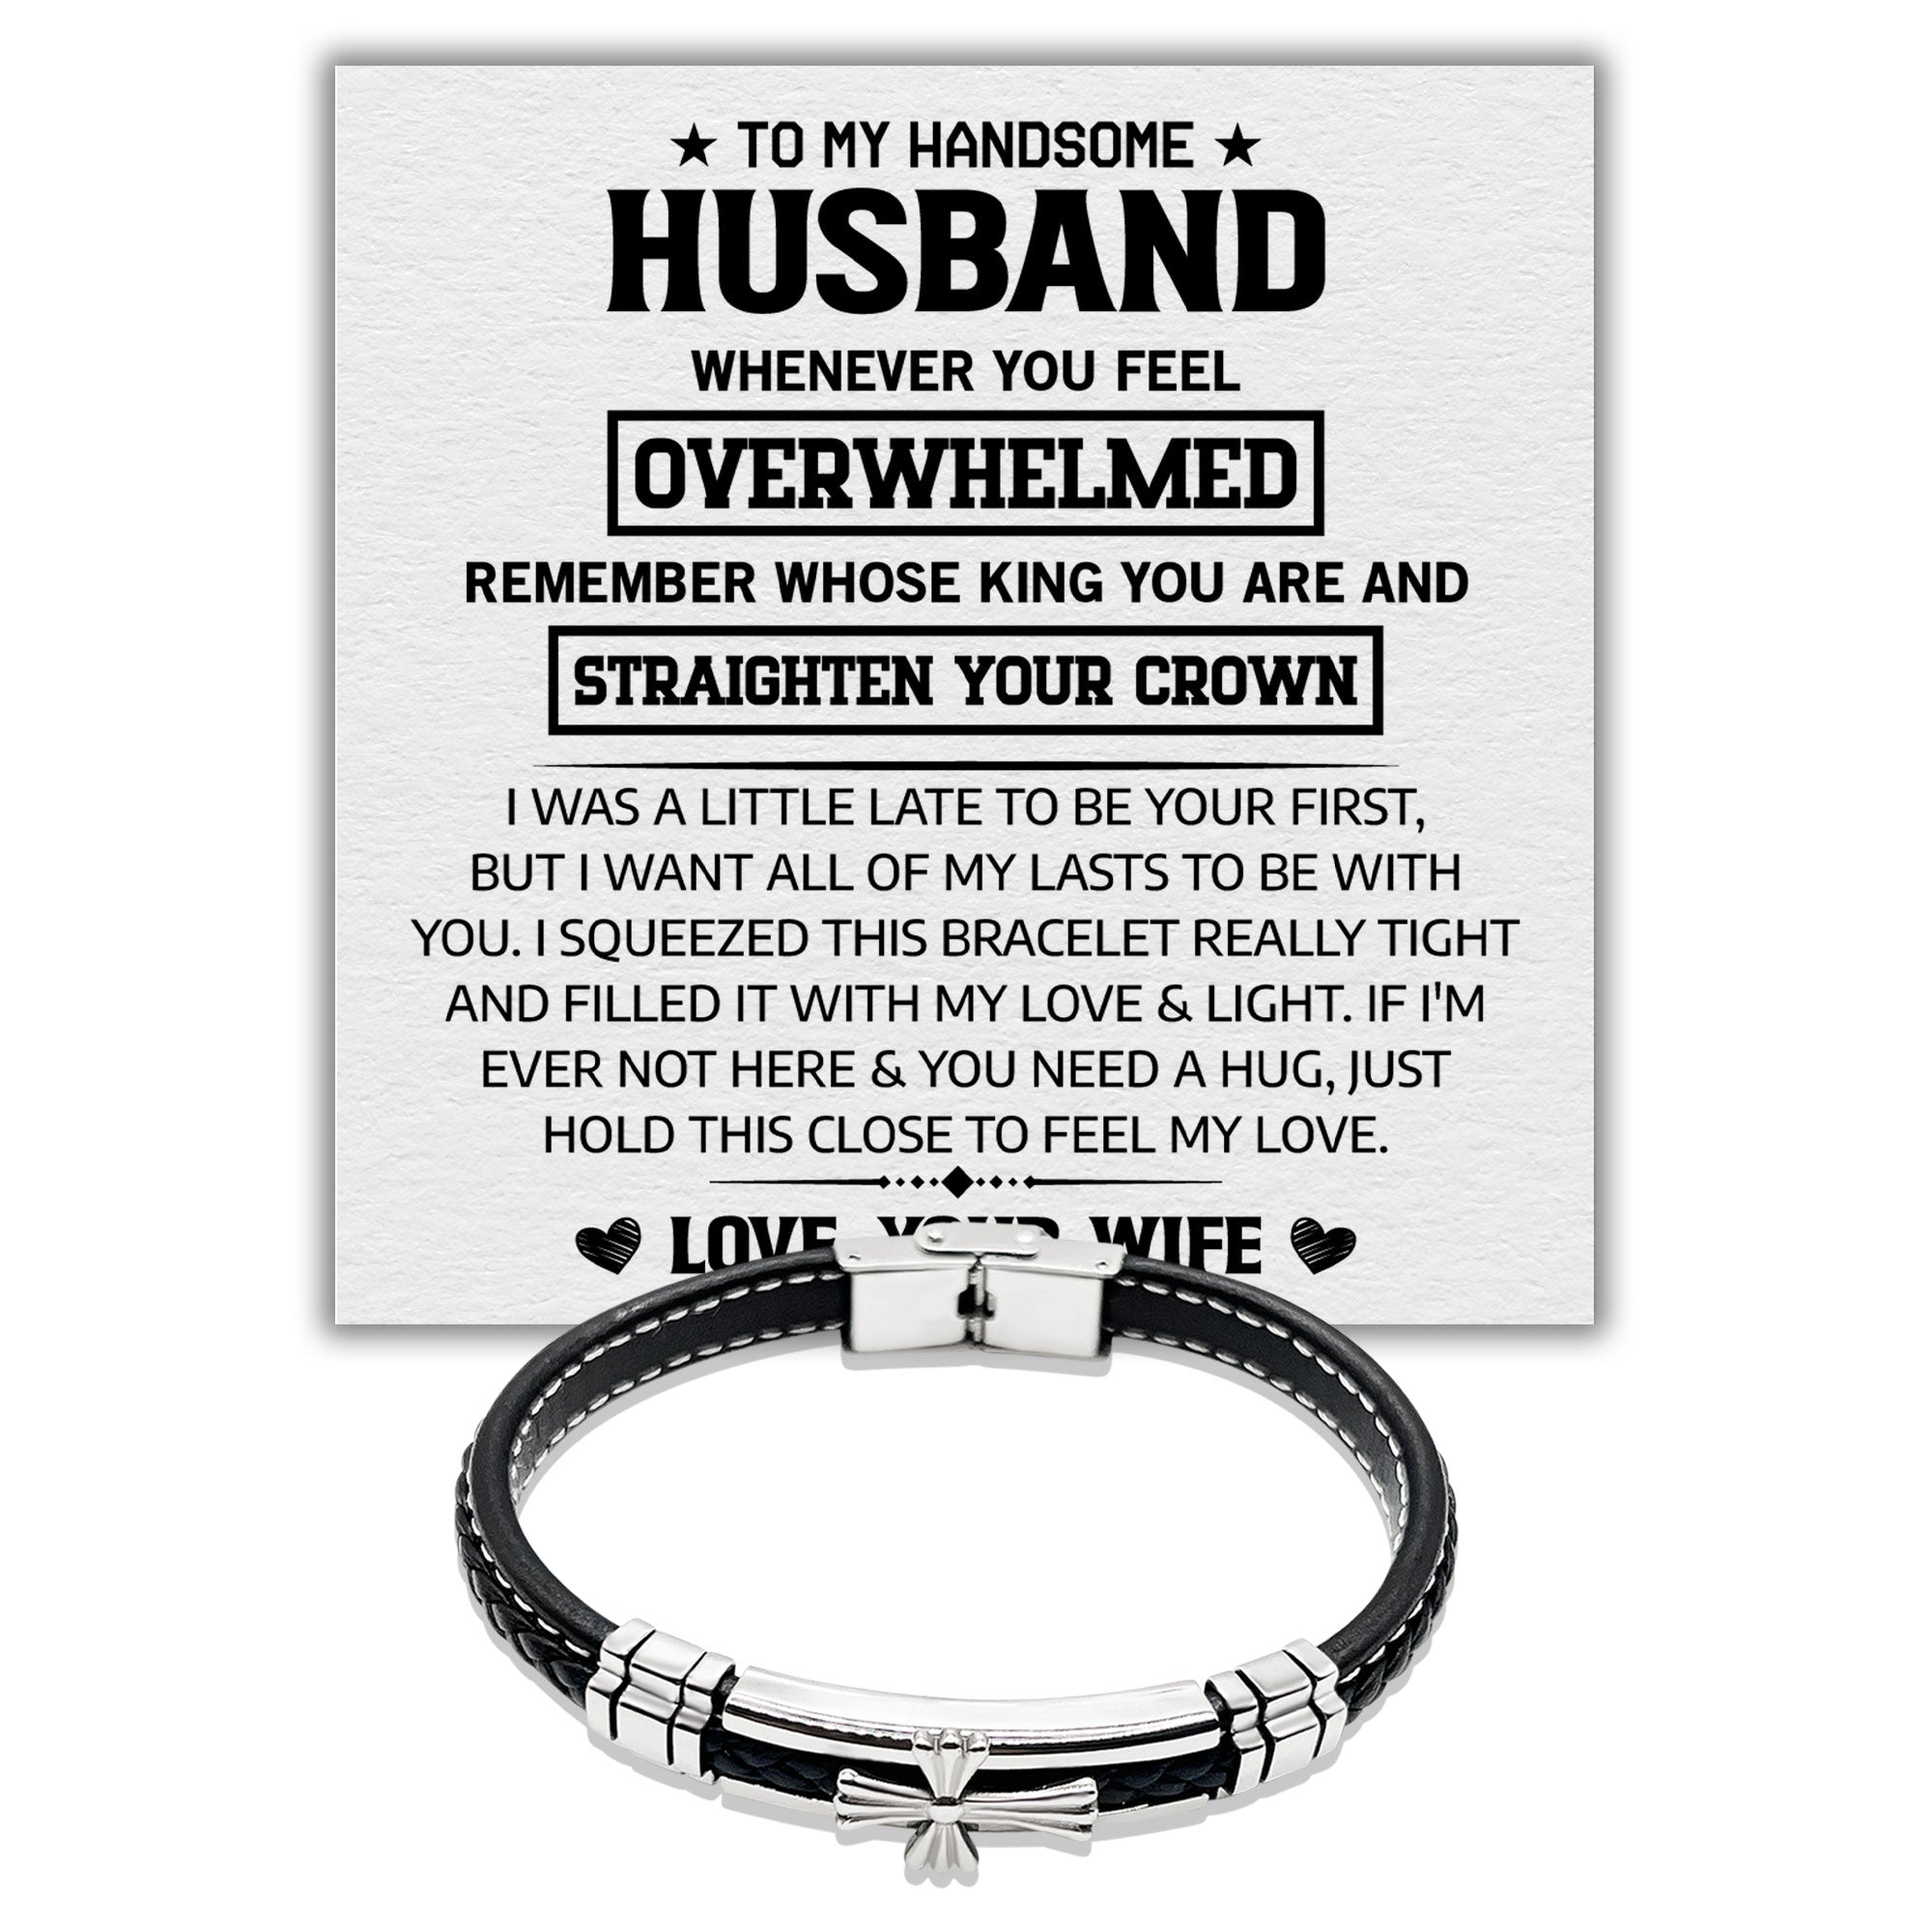 To my Husband Love, Your Wife - Premium Stainless Steel Celtic Cross Black Italian Leather Bracelet